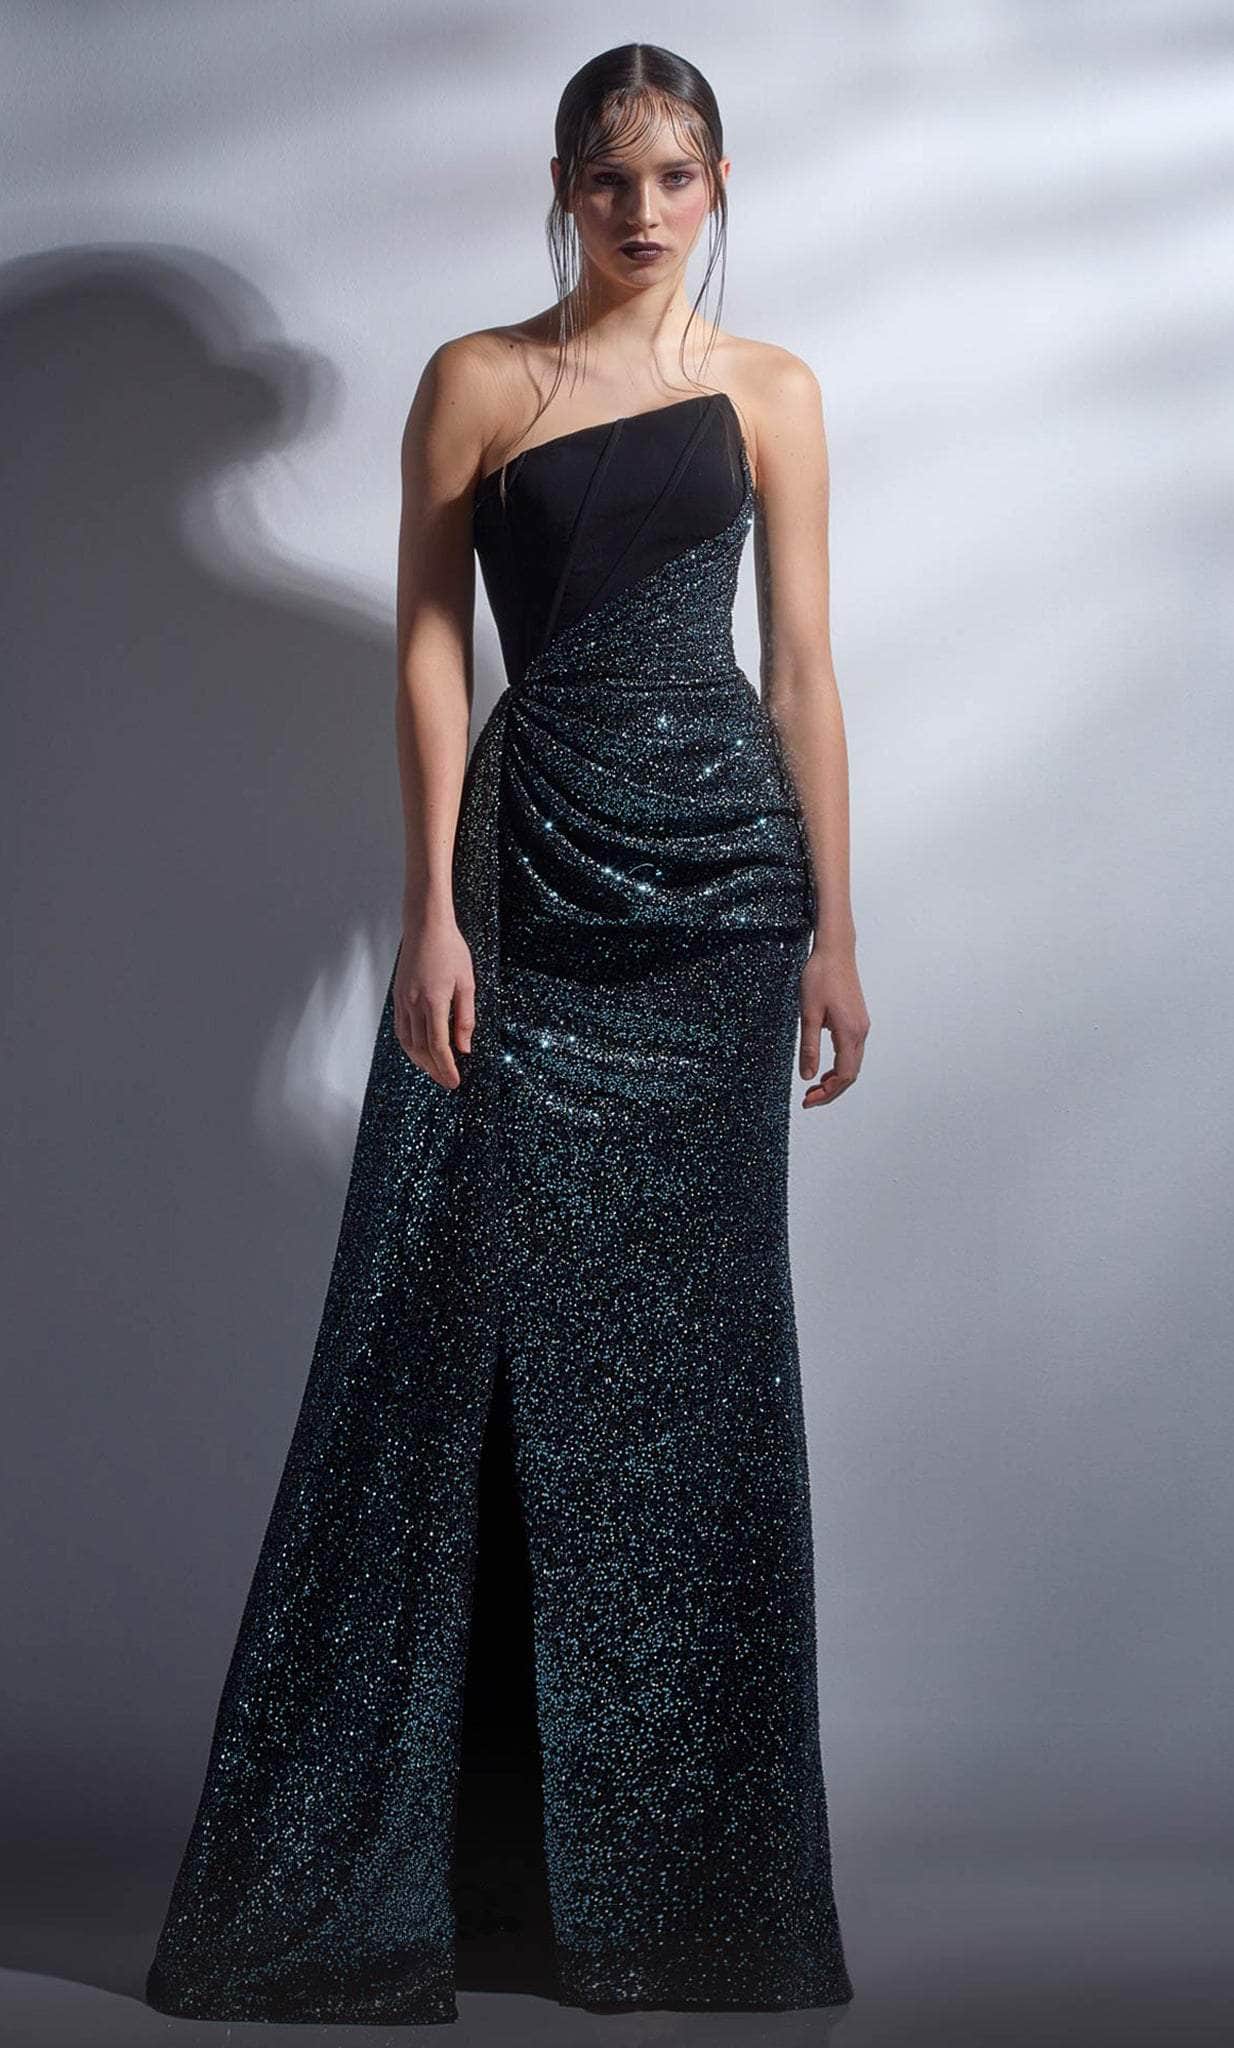 MNM Couture G1251 - Asymmetrical Glitter Evening Gown
